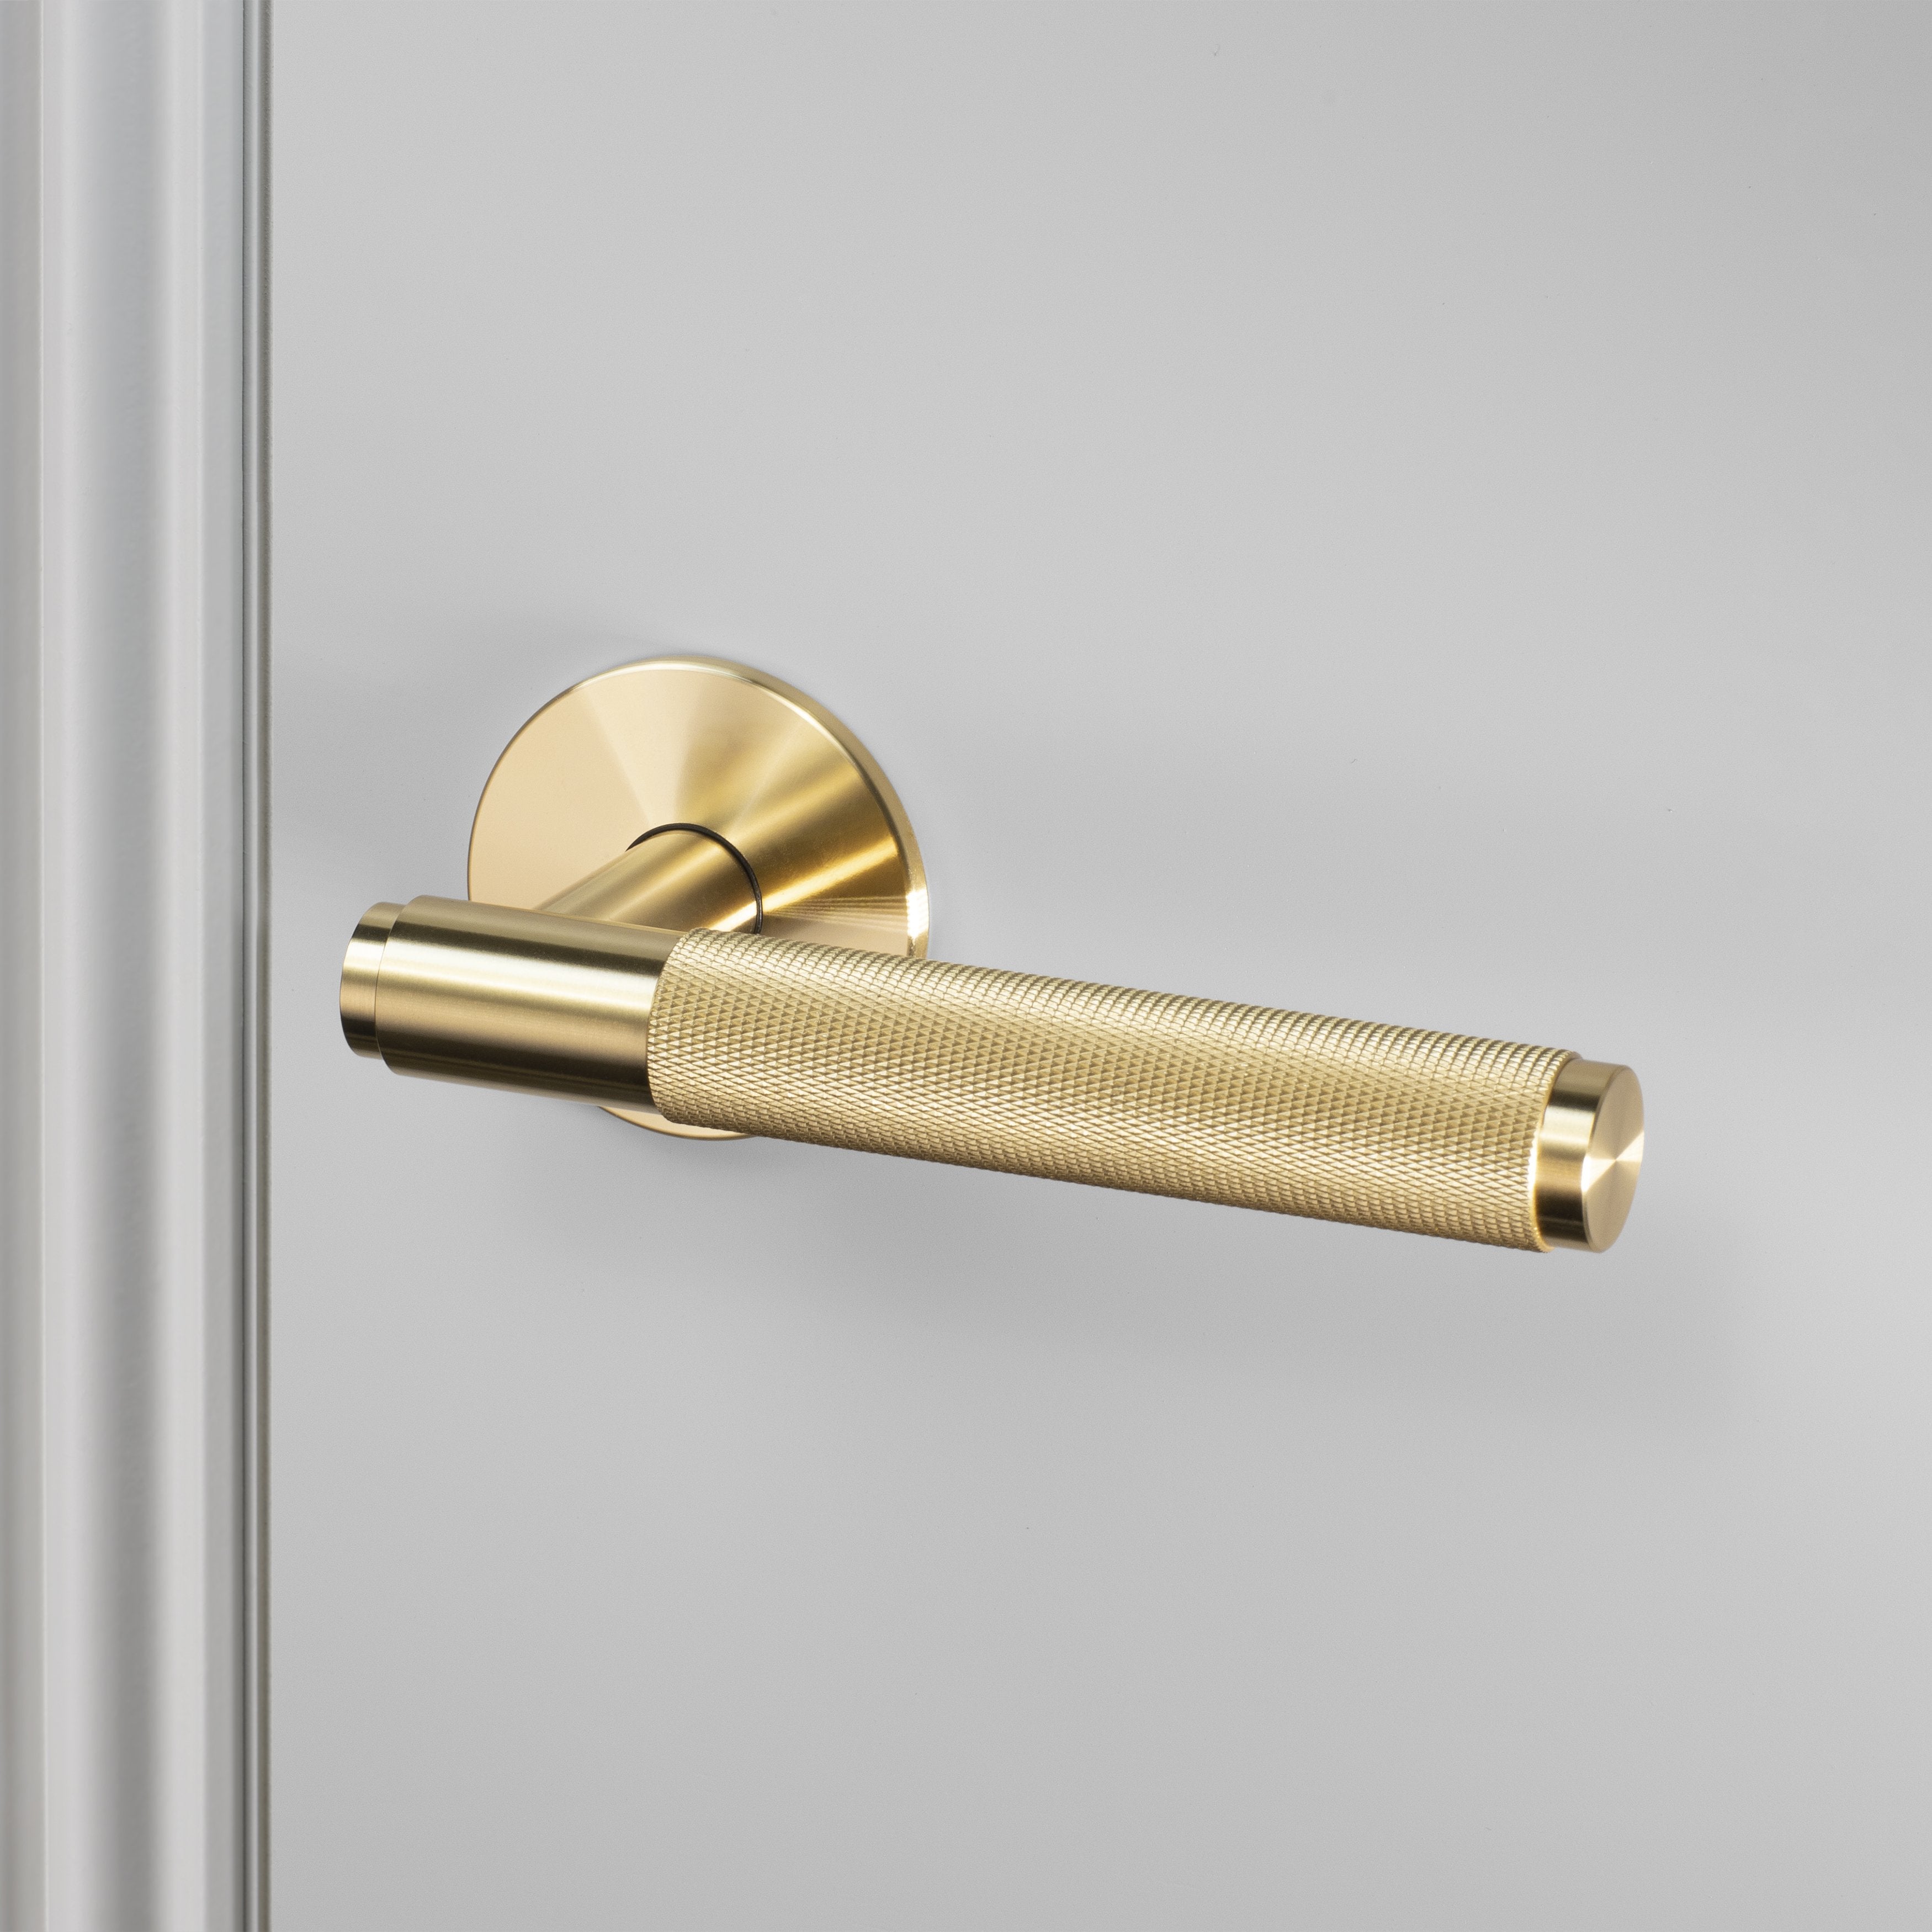 Buster and Punch DOOR LEVER HANDLE / BRASS - UNSPRUNG - 30MM - No.42 Interiors